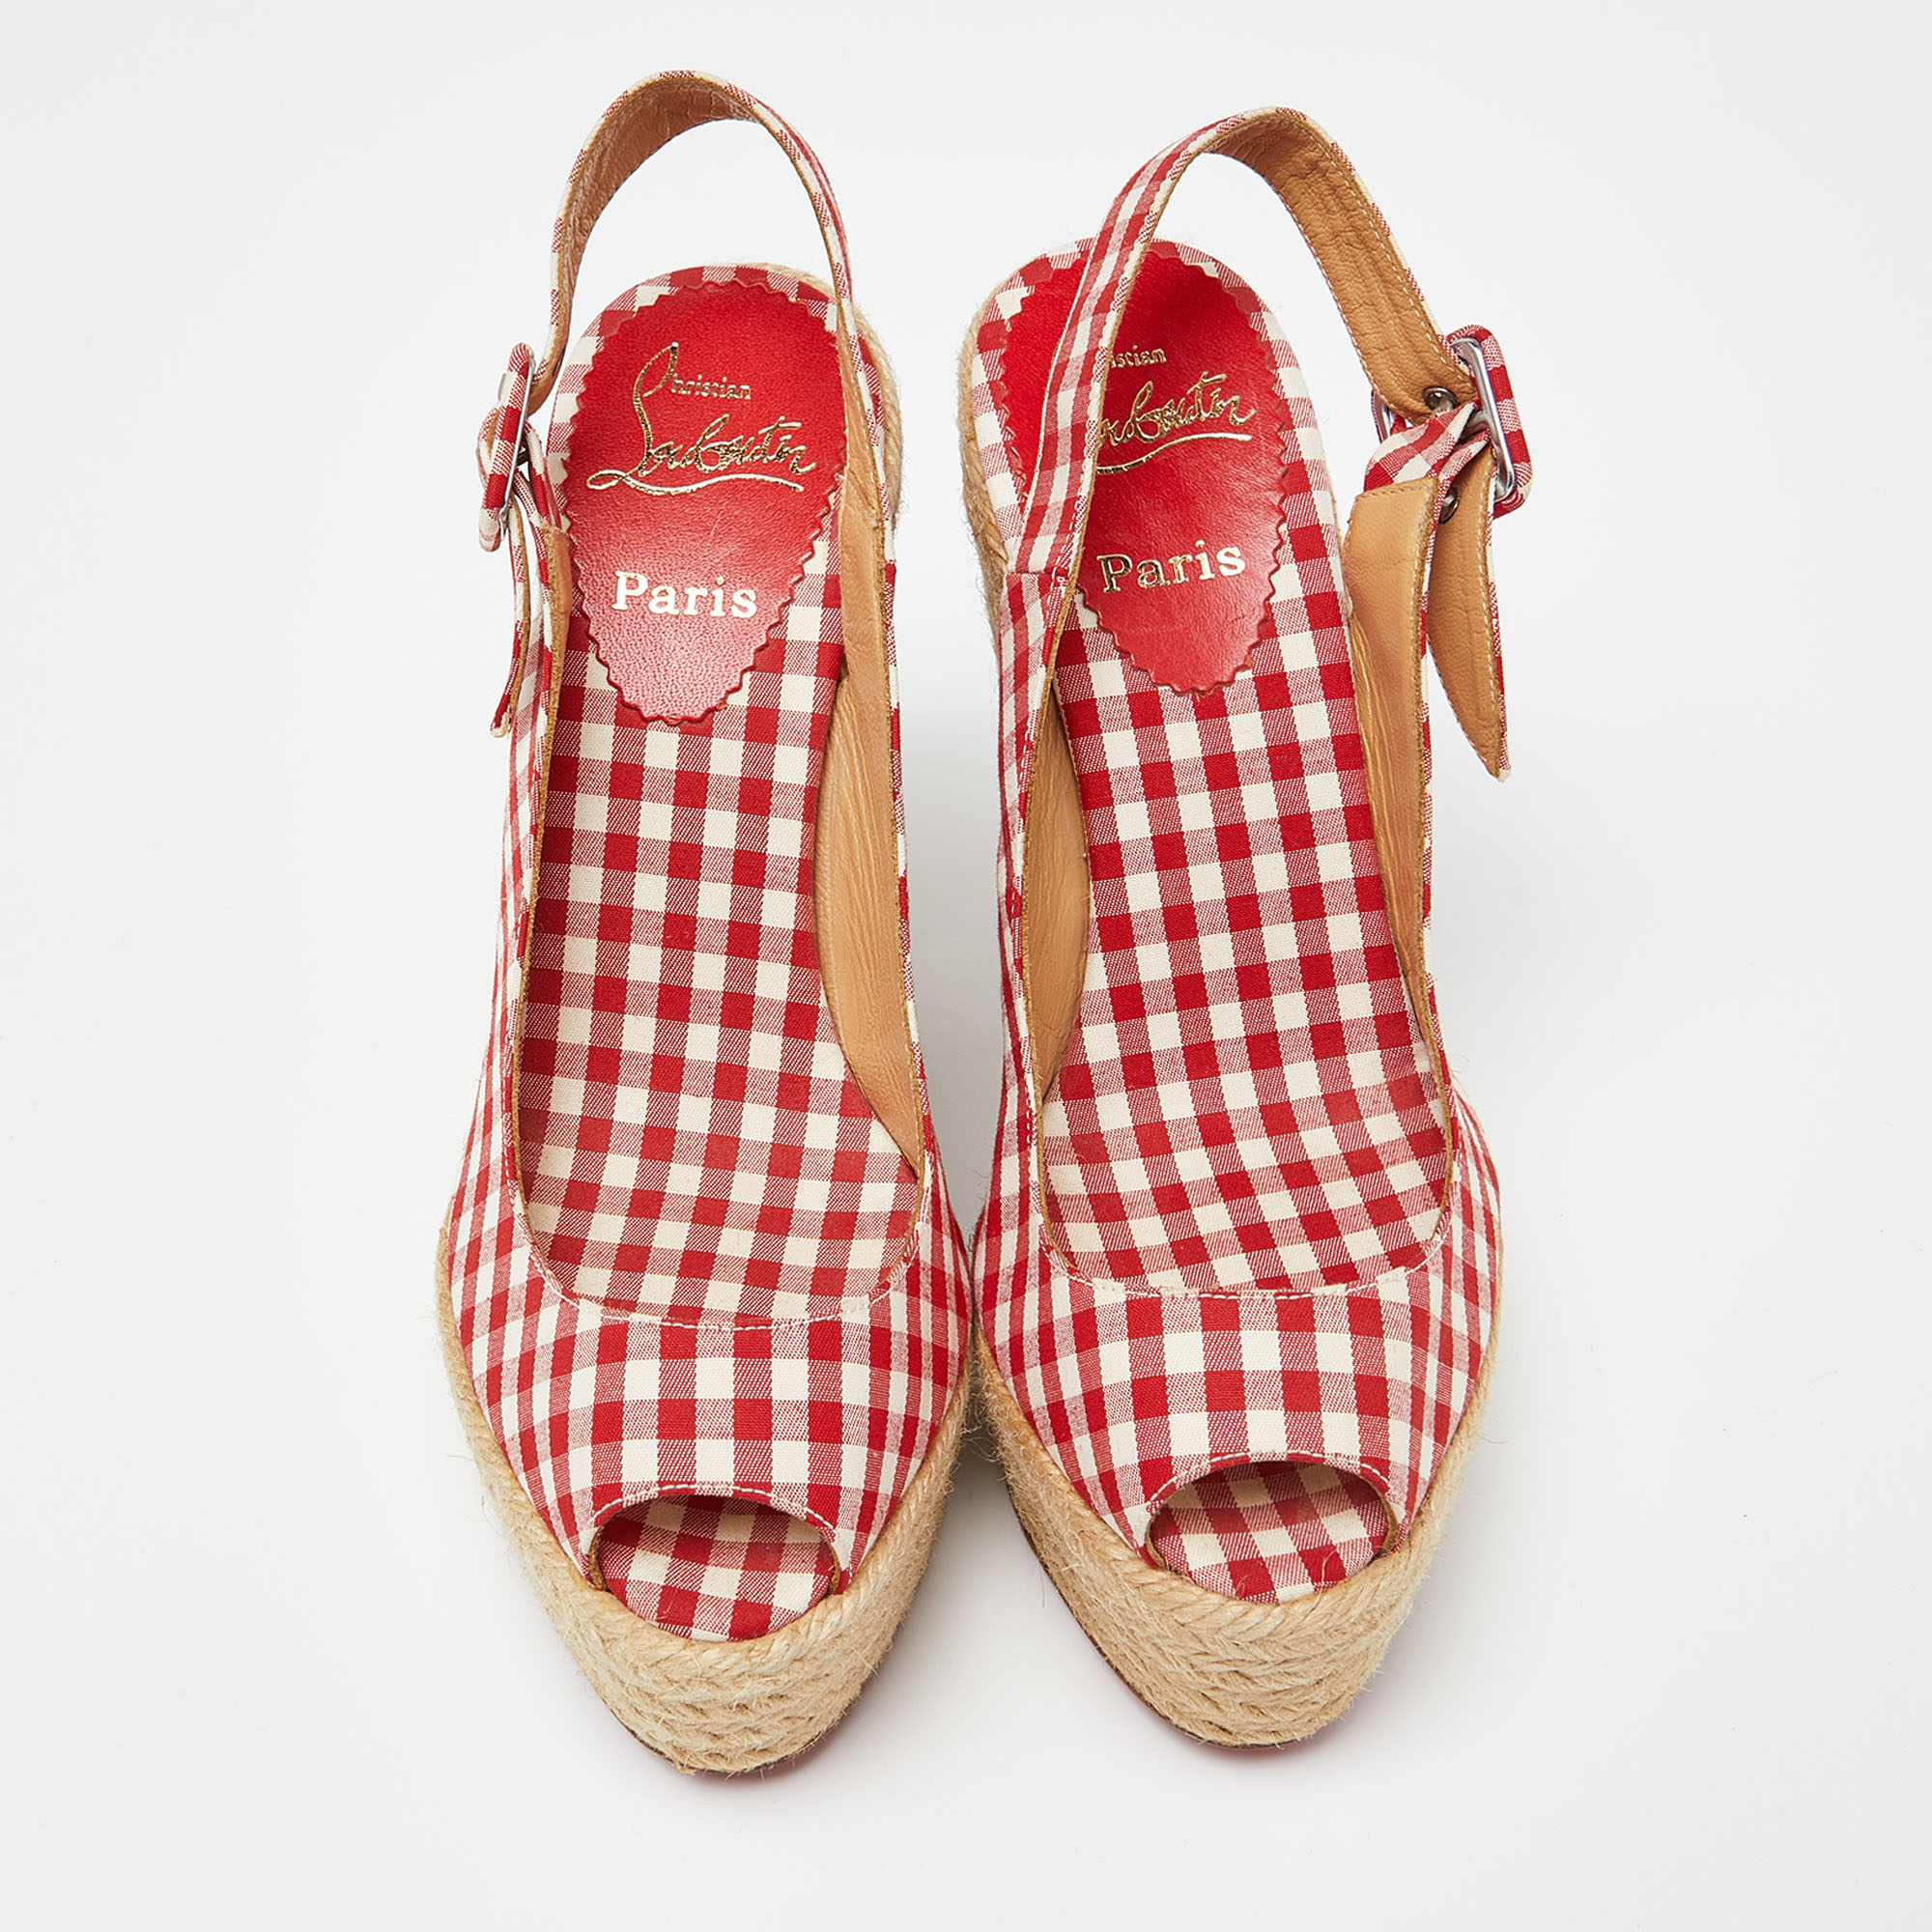 Christian Louboutin Red/White Gingham Fabric Menorca Espadrille Wedge Pumps Size 37